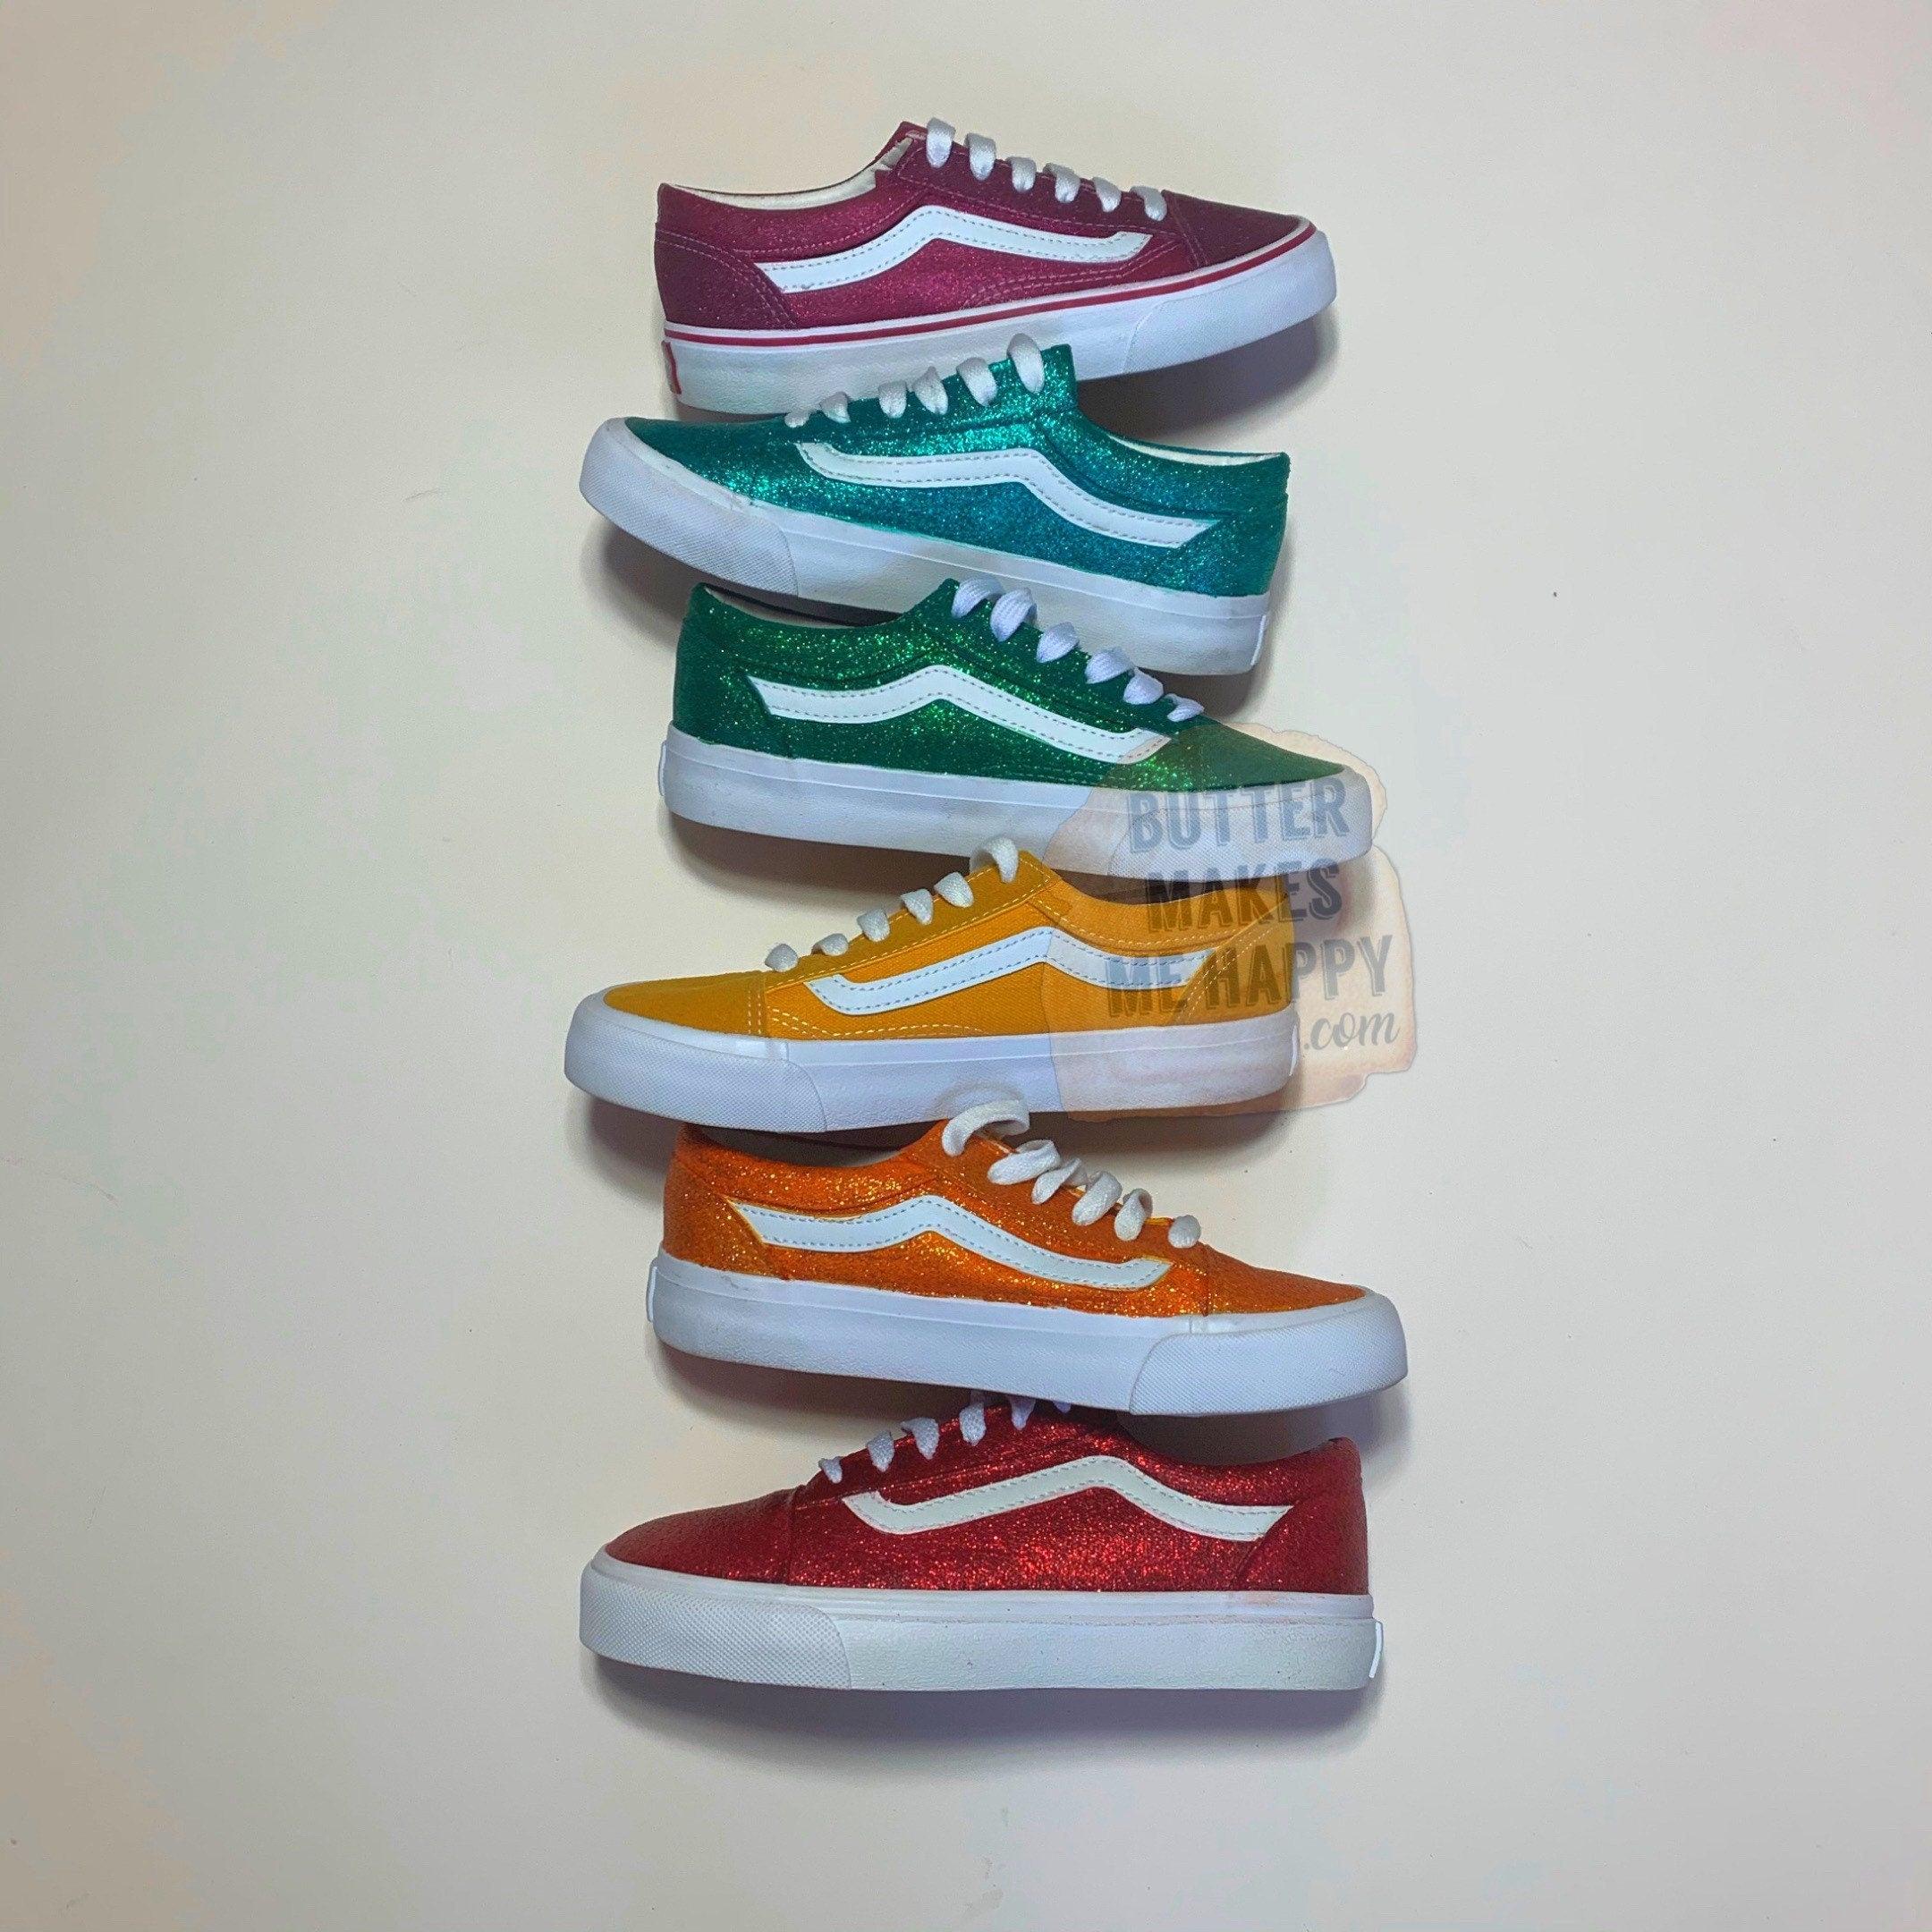 Color Glitter – Pick Vans Your Old Skool - Sparkly ButterMakesMeHappy